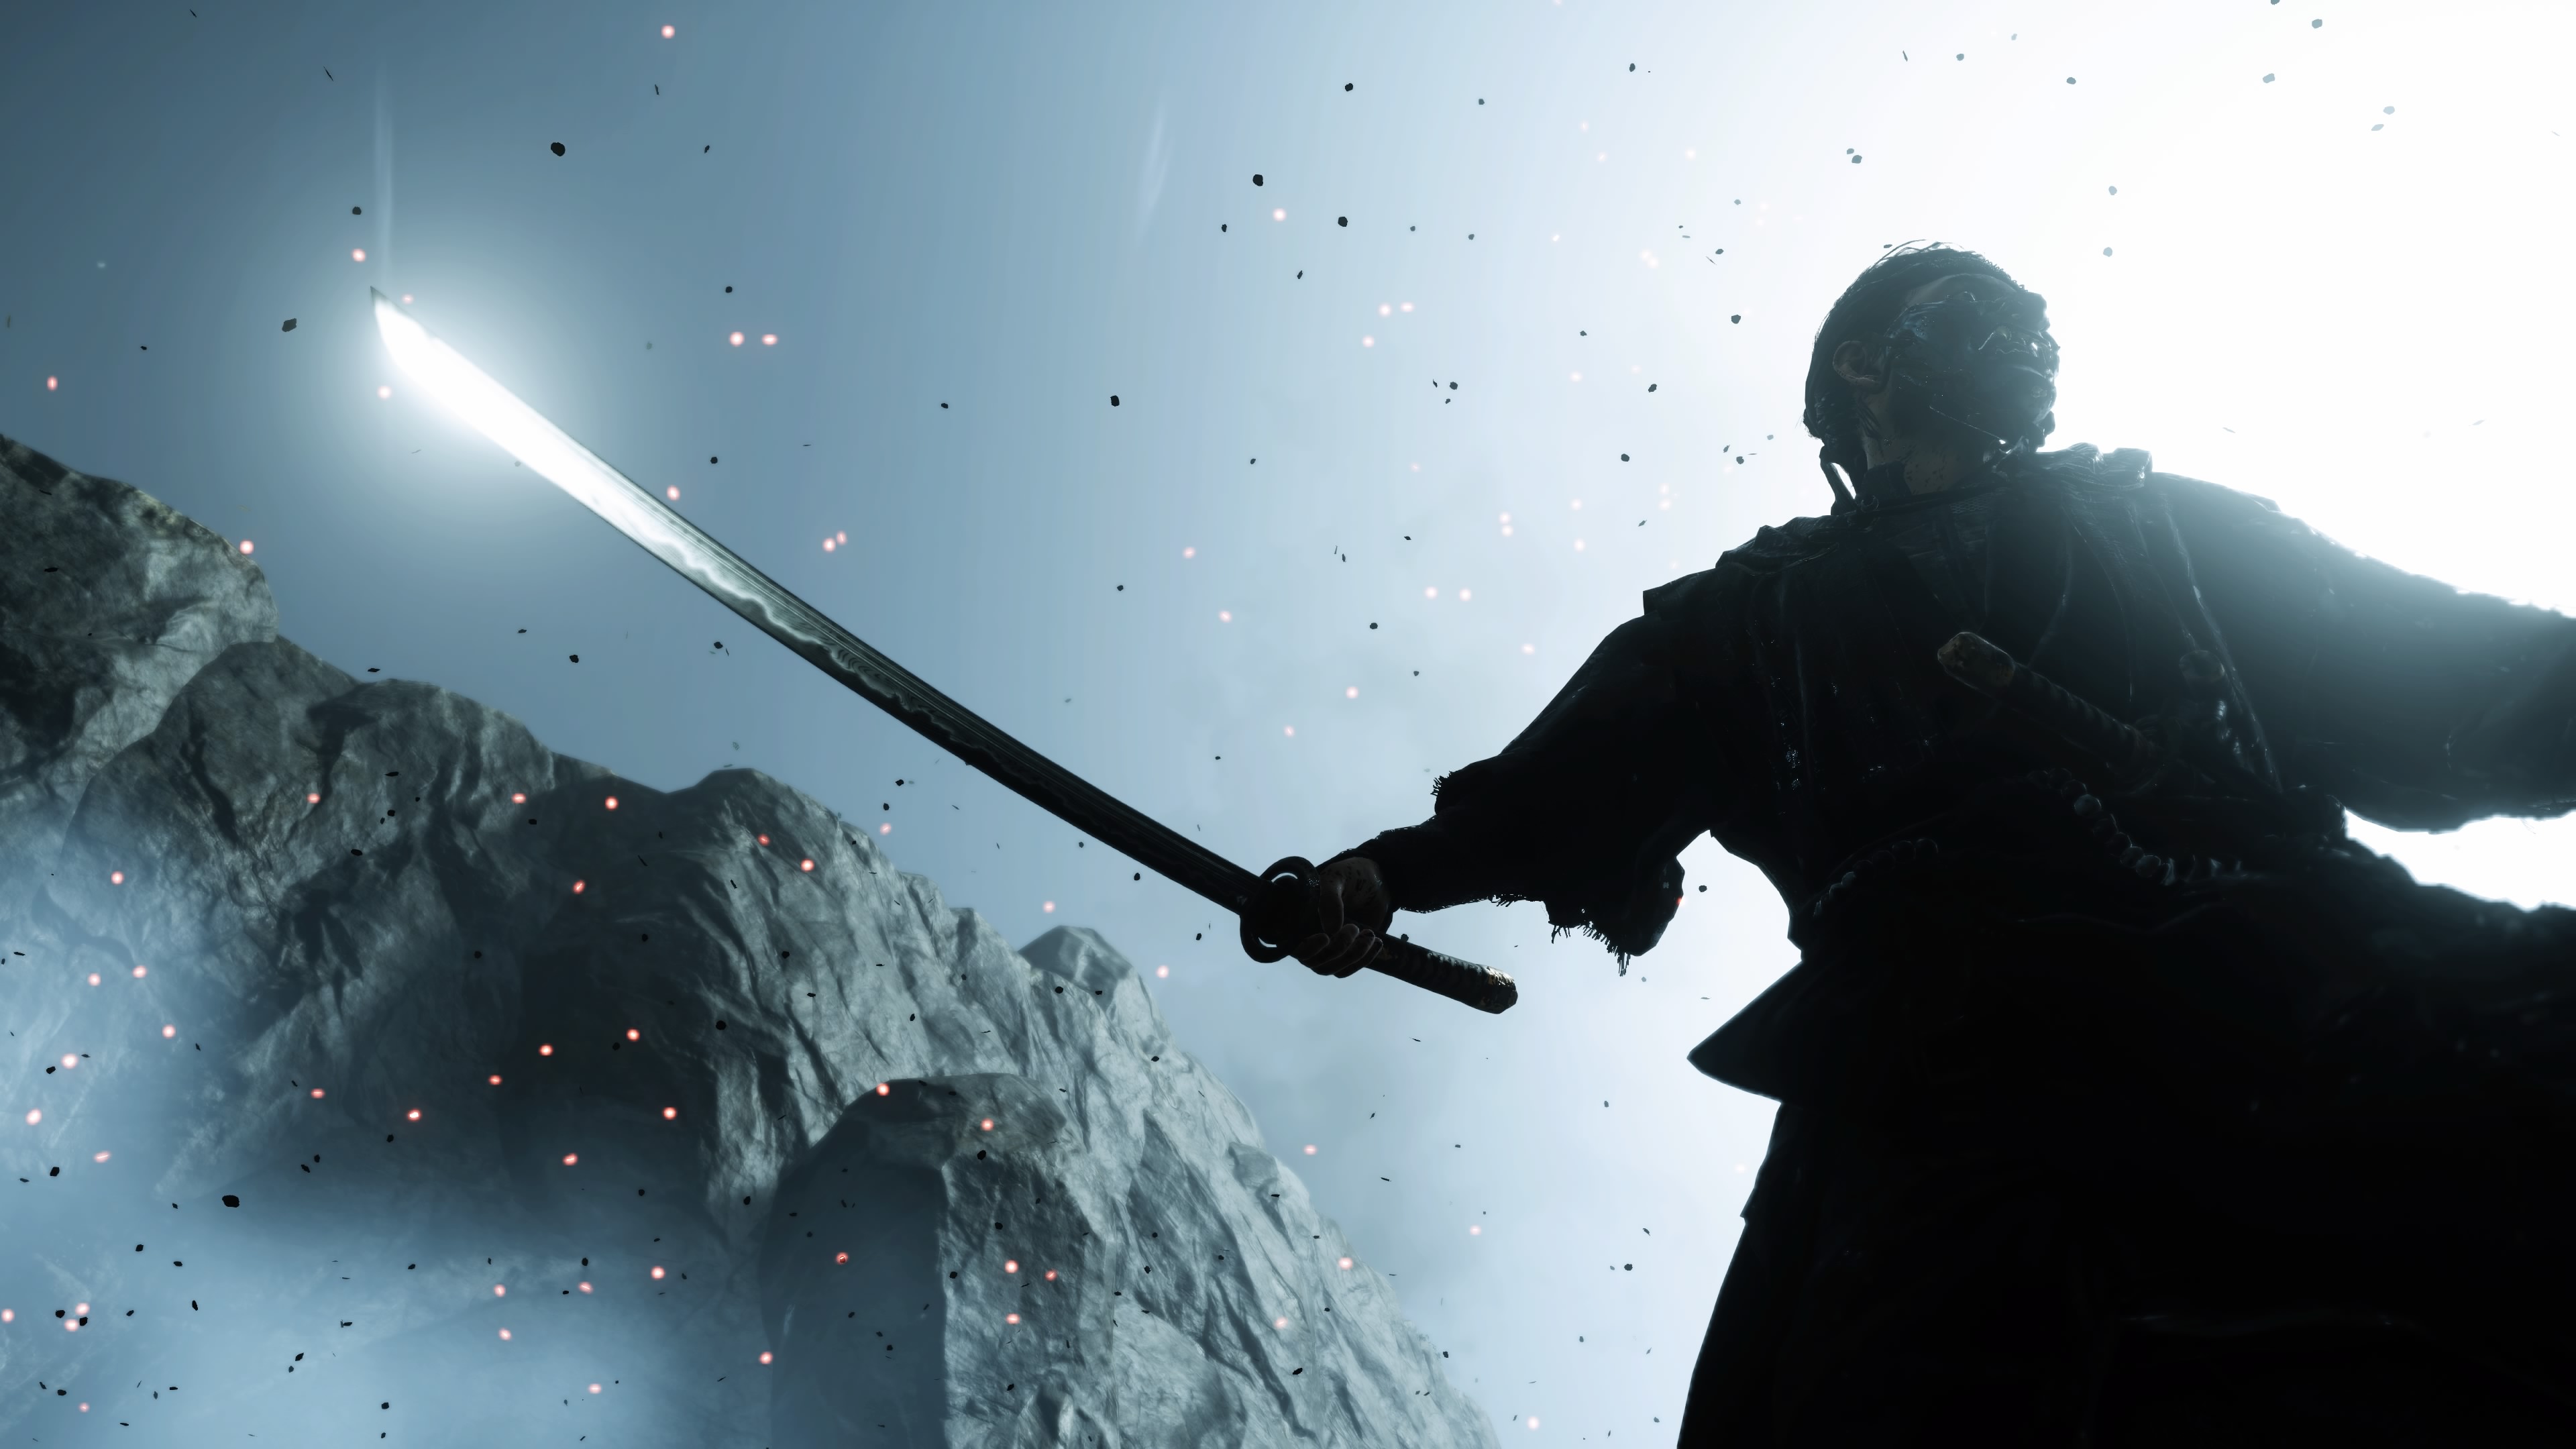 General 3840x2160 Ghost of Tsushima  Jin Sakai video games video game art screen shot PlayStation 4 Playstation 5 Sucker Punch Productions video game characters CGI mask standing weapon sword